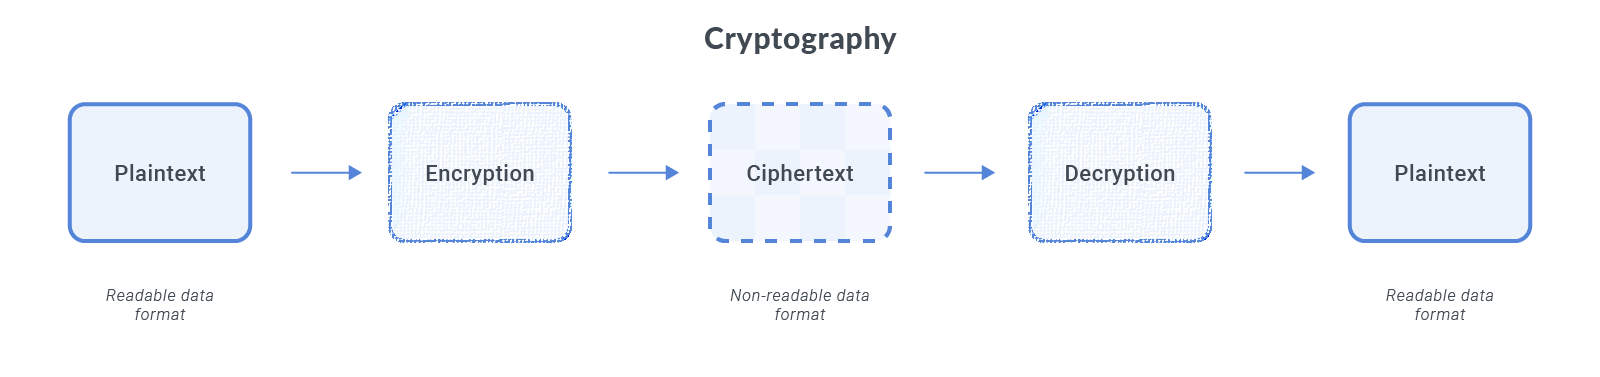 How the art and science of Cryptography simply works 